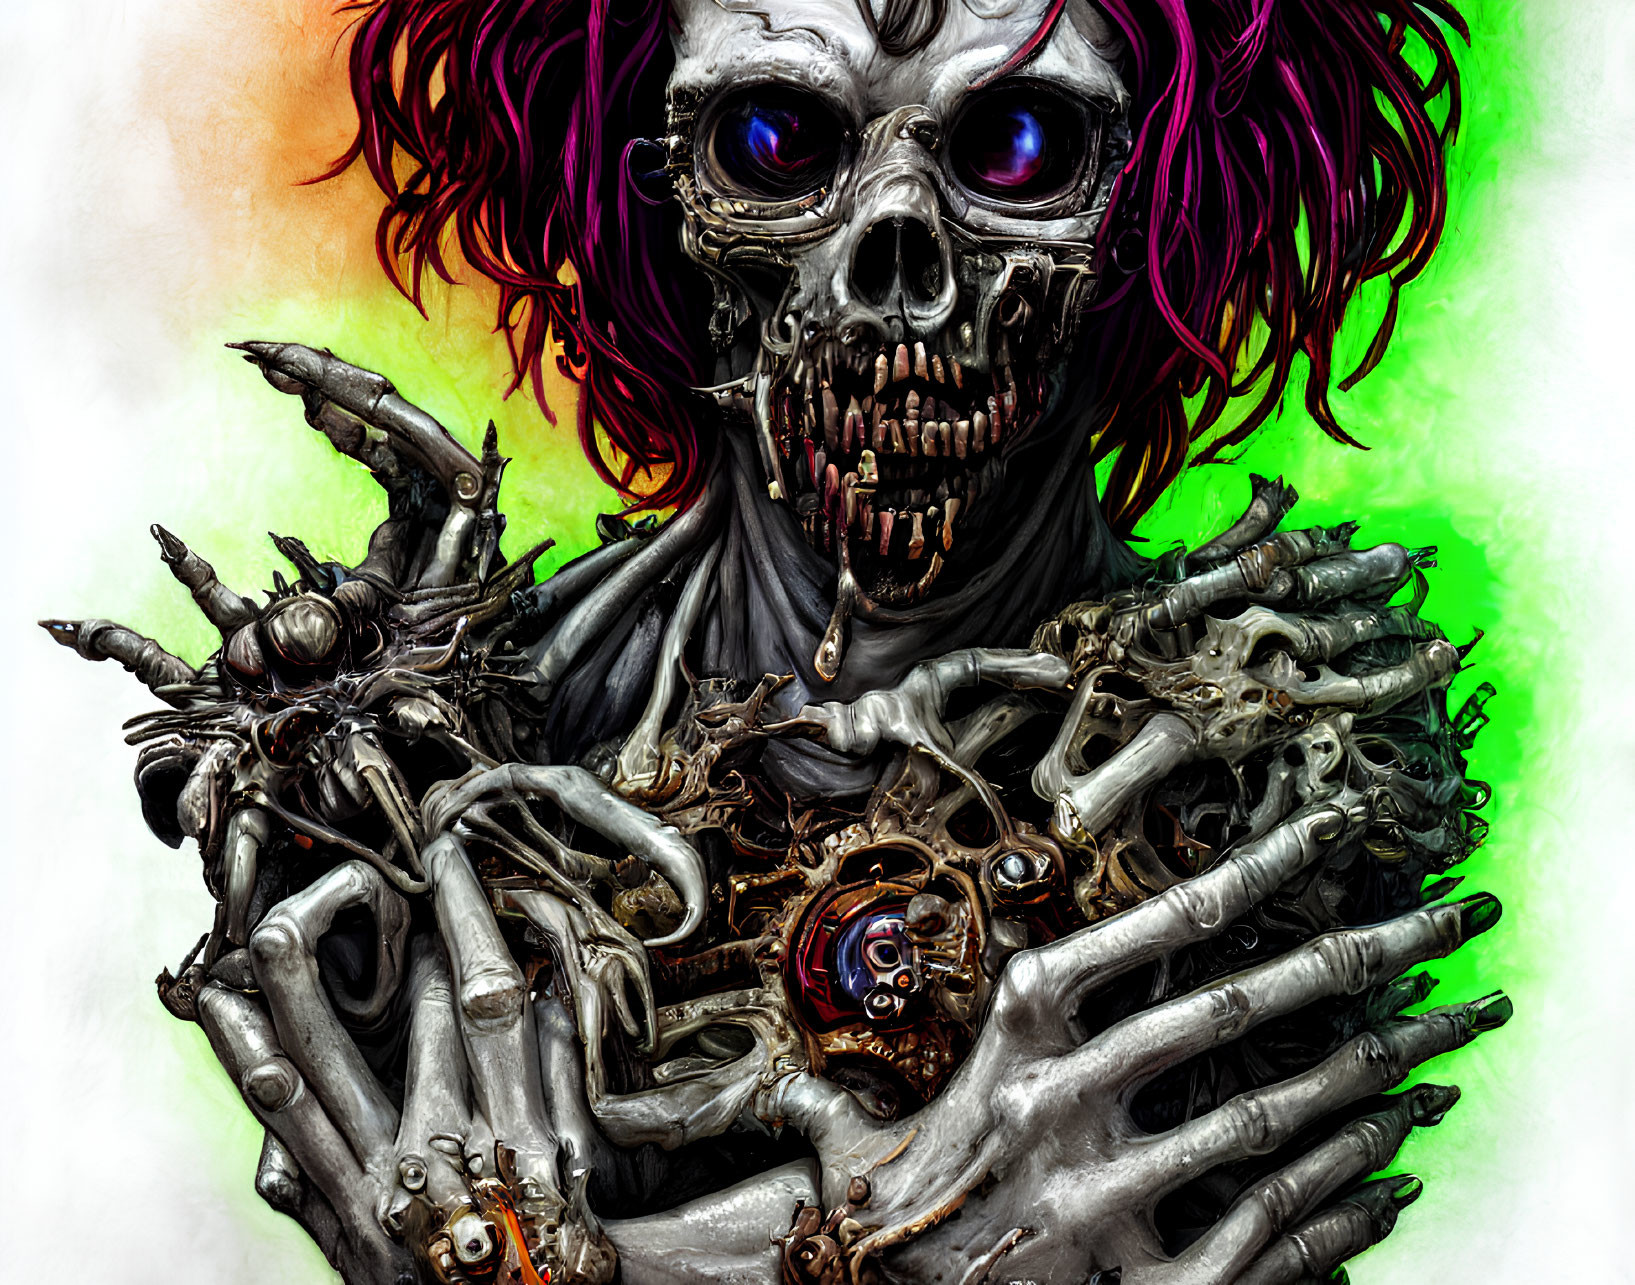 Colorful skeletal figure with purple hair and glowing blue eyes intertwined with mechanical and bone elements